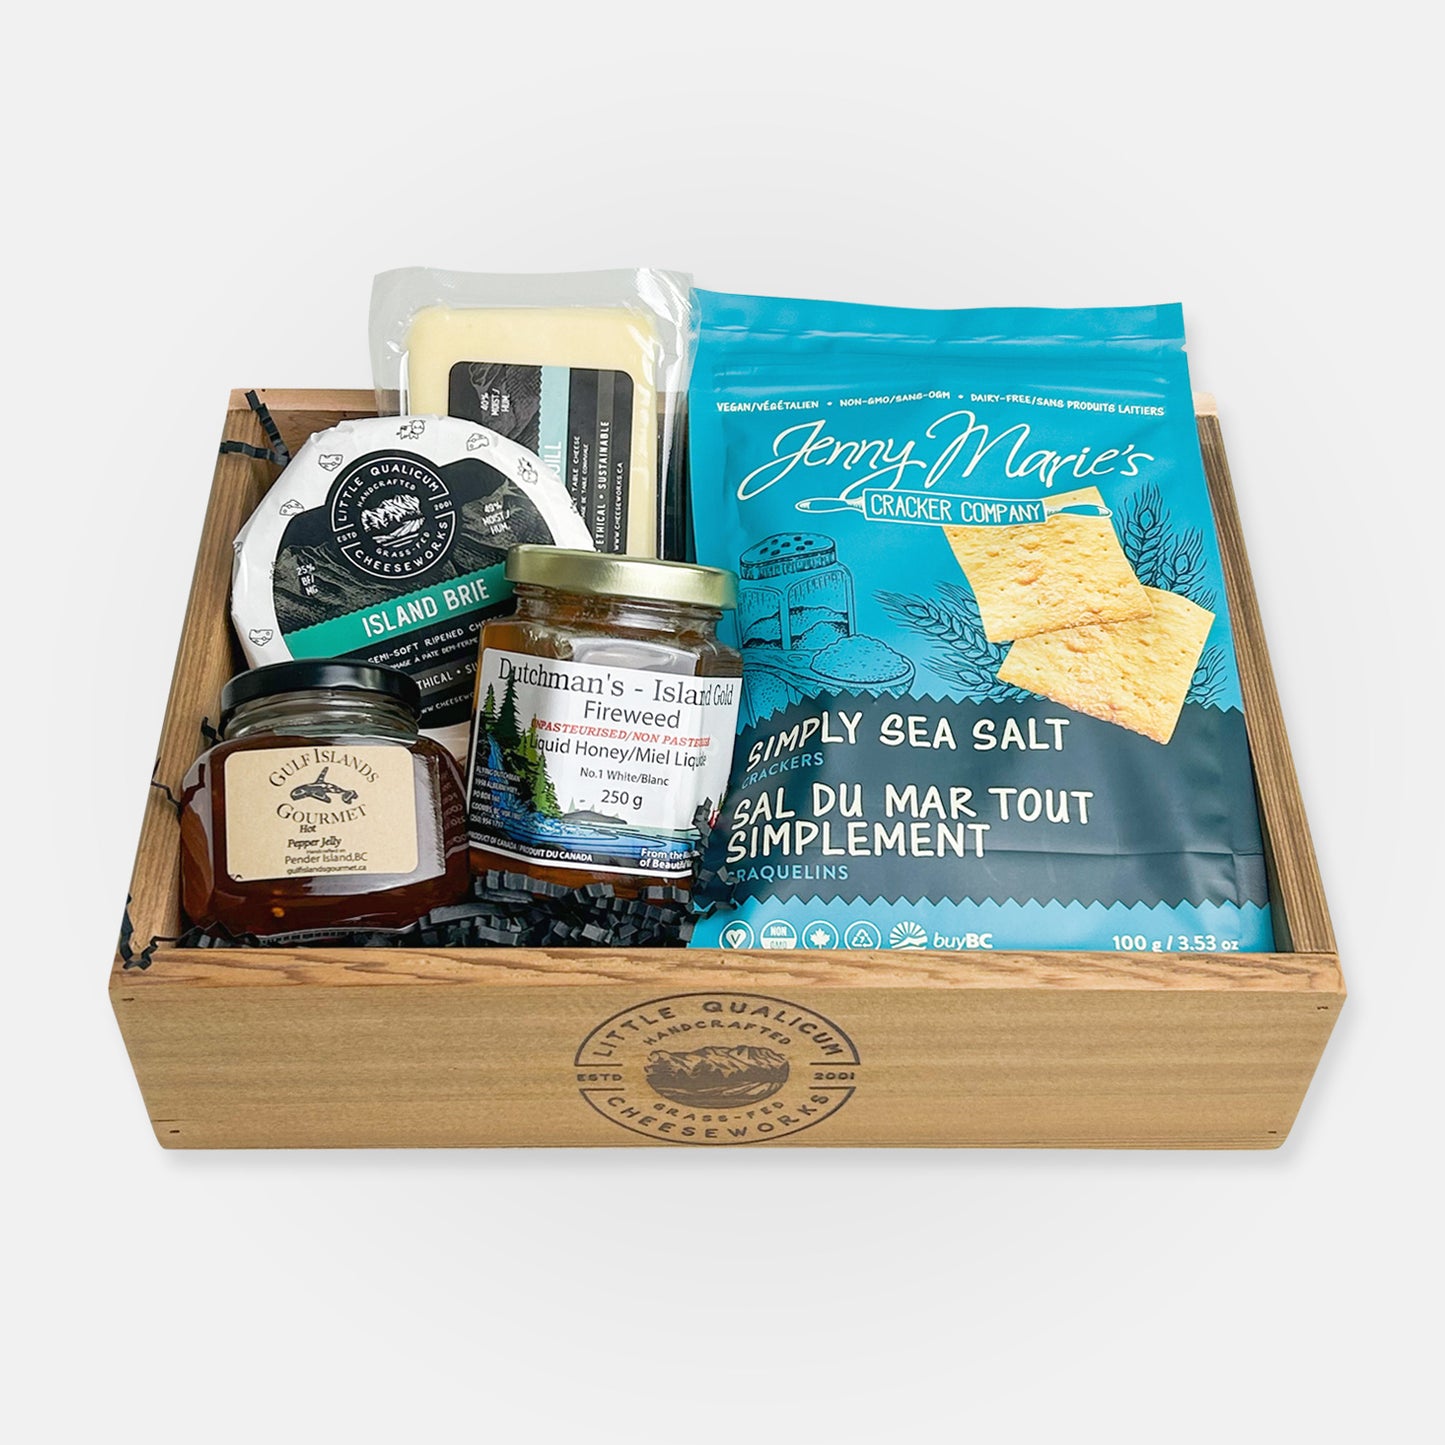 Gift Basket: Just Right